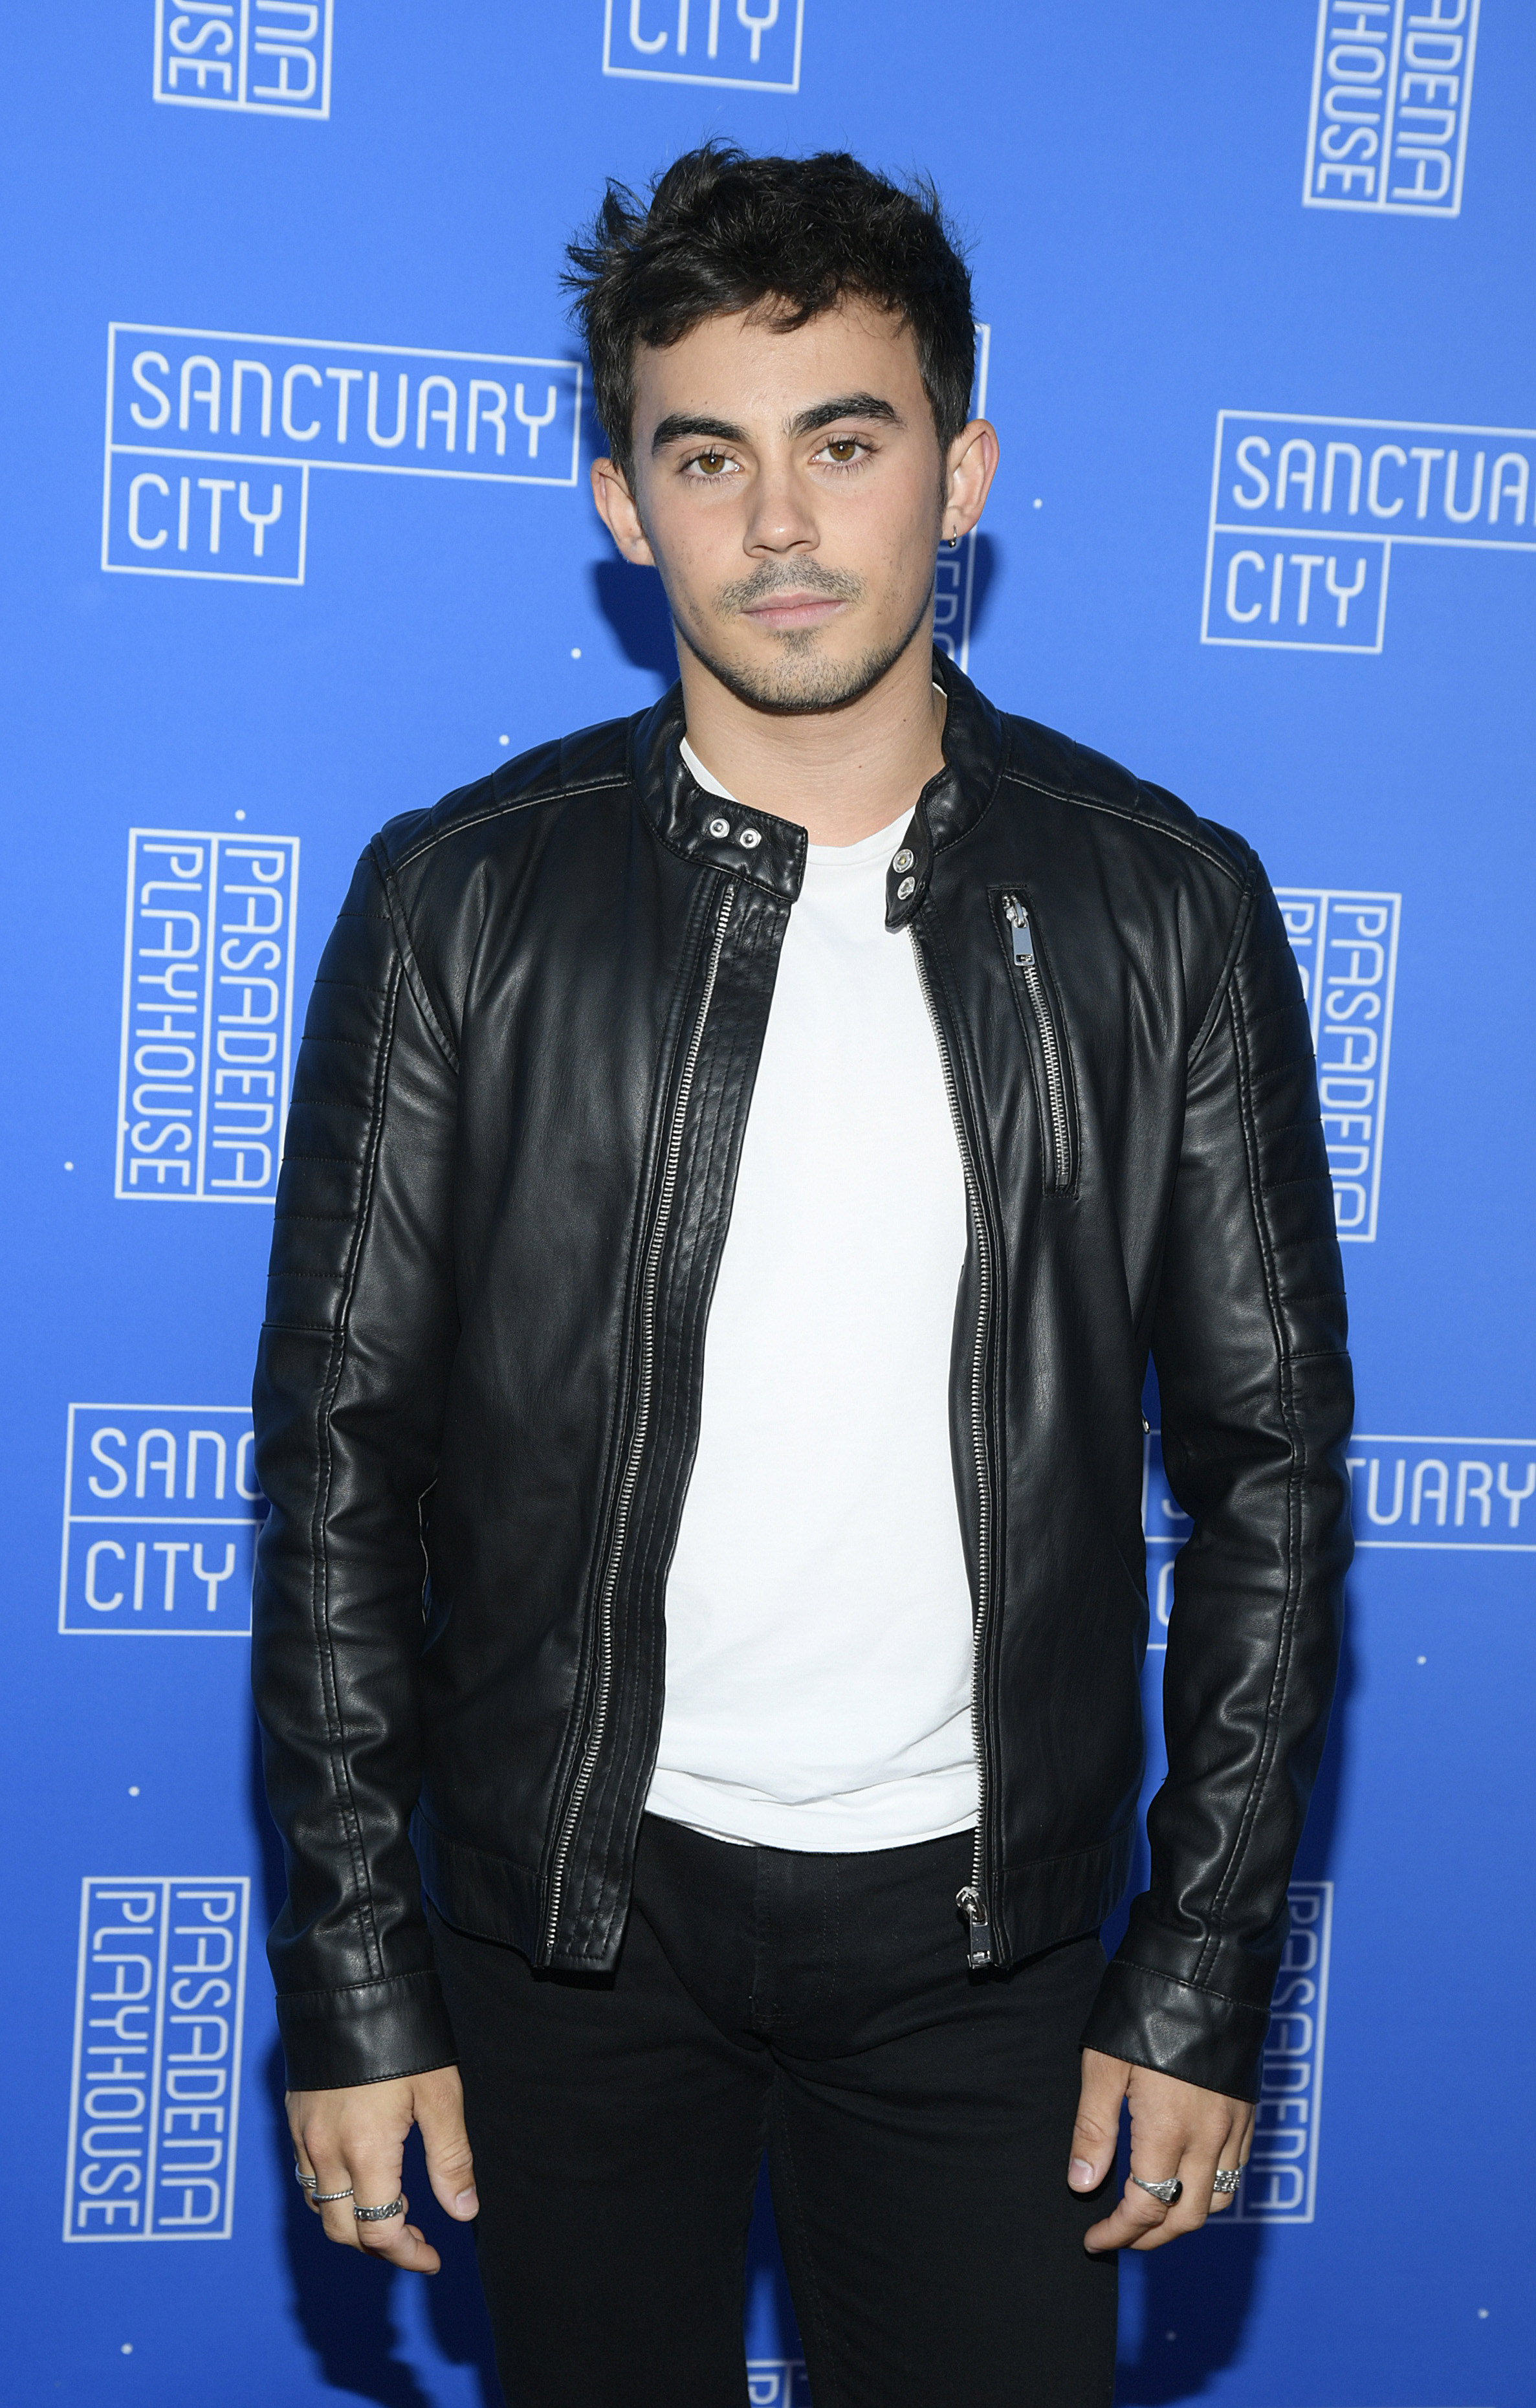 Tyler at an event with messy hair and a leather jacket